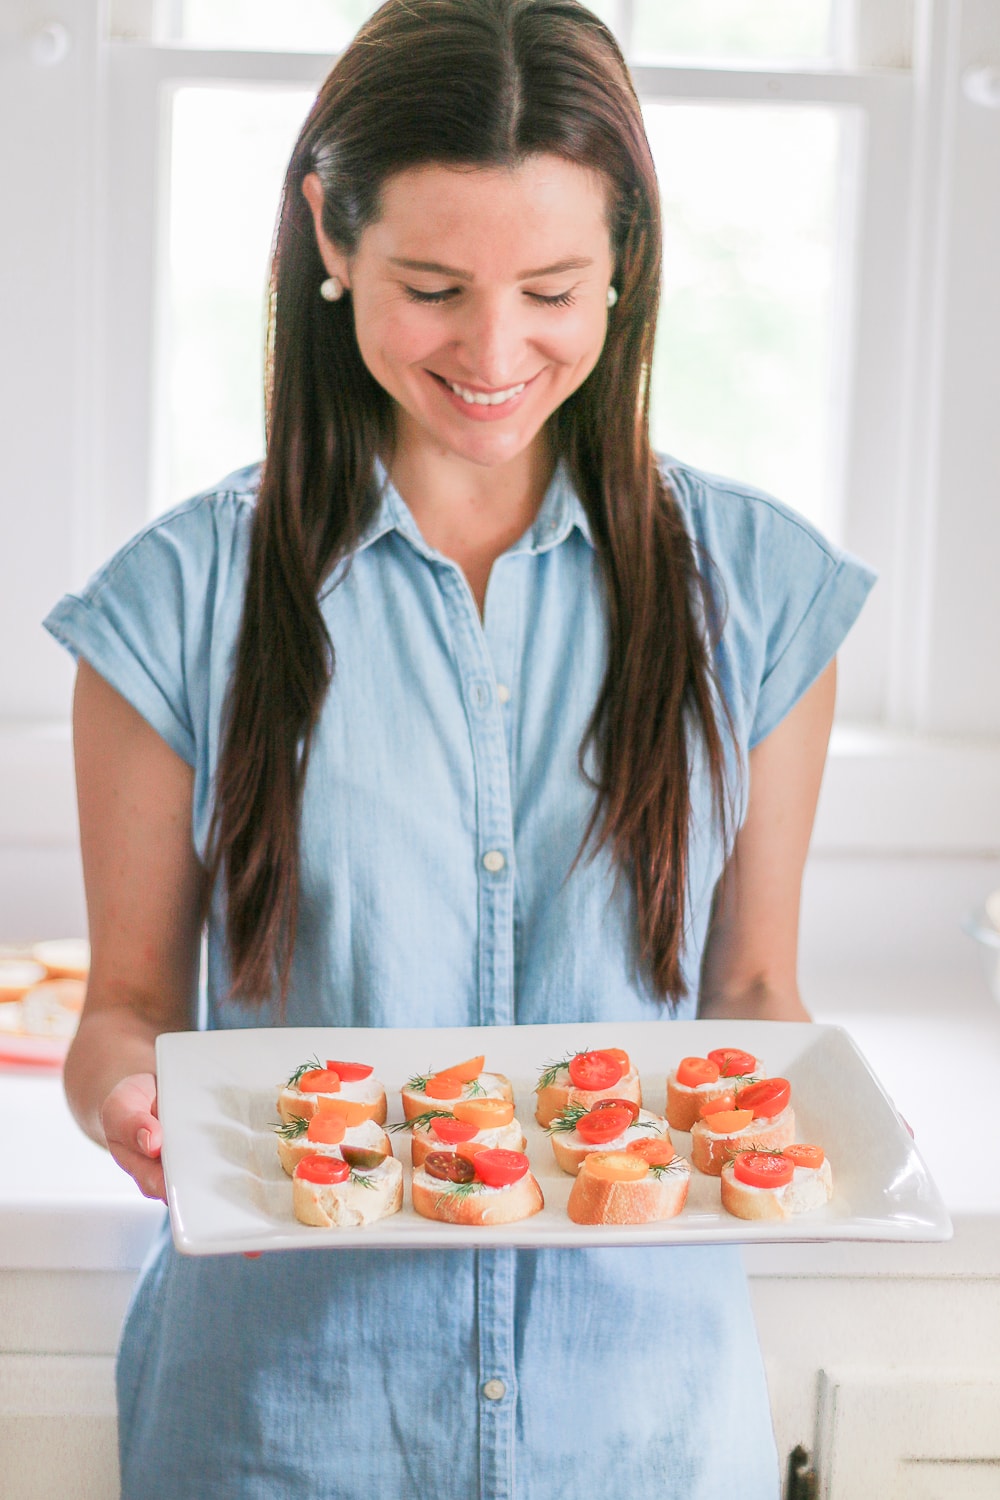 Southern lifestyle blogger Stephanie Ziajka shares one of her favorite crostini recipes with goat cheese and tomatoes on Diary of a Debutante